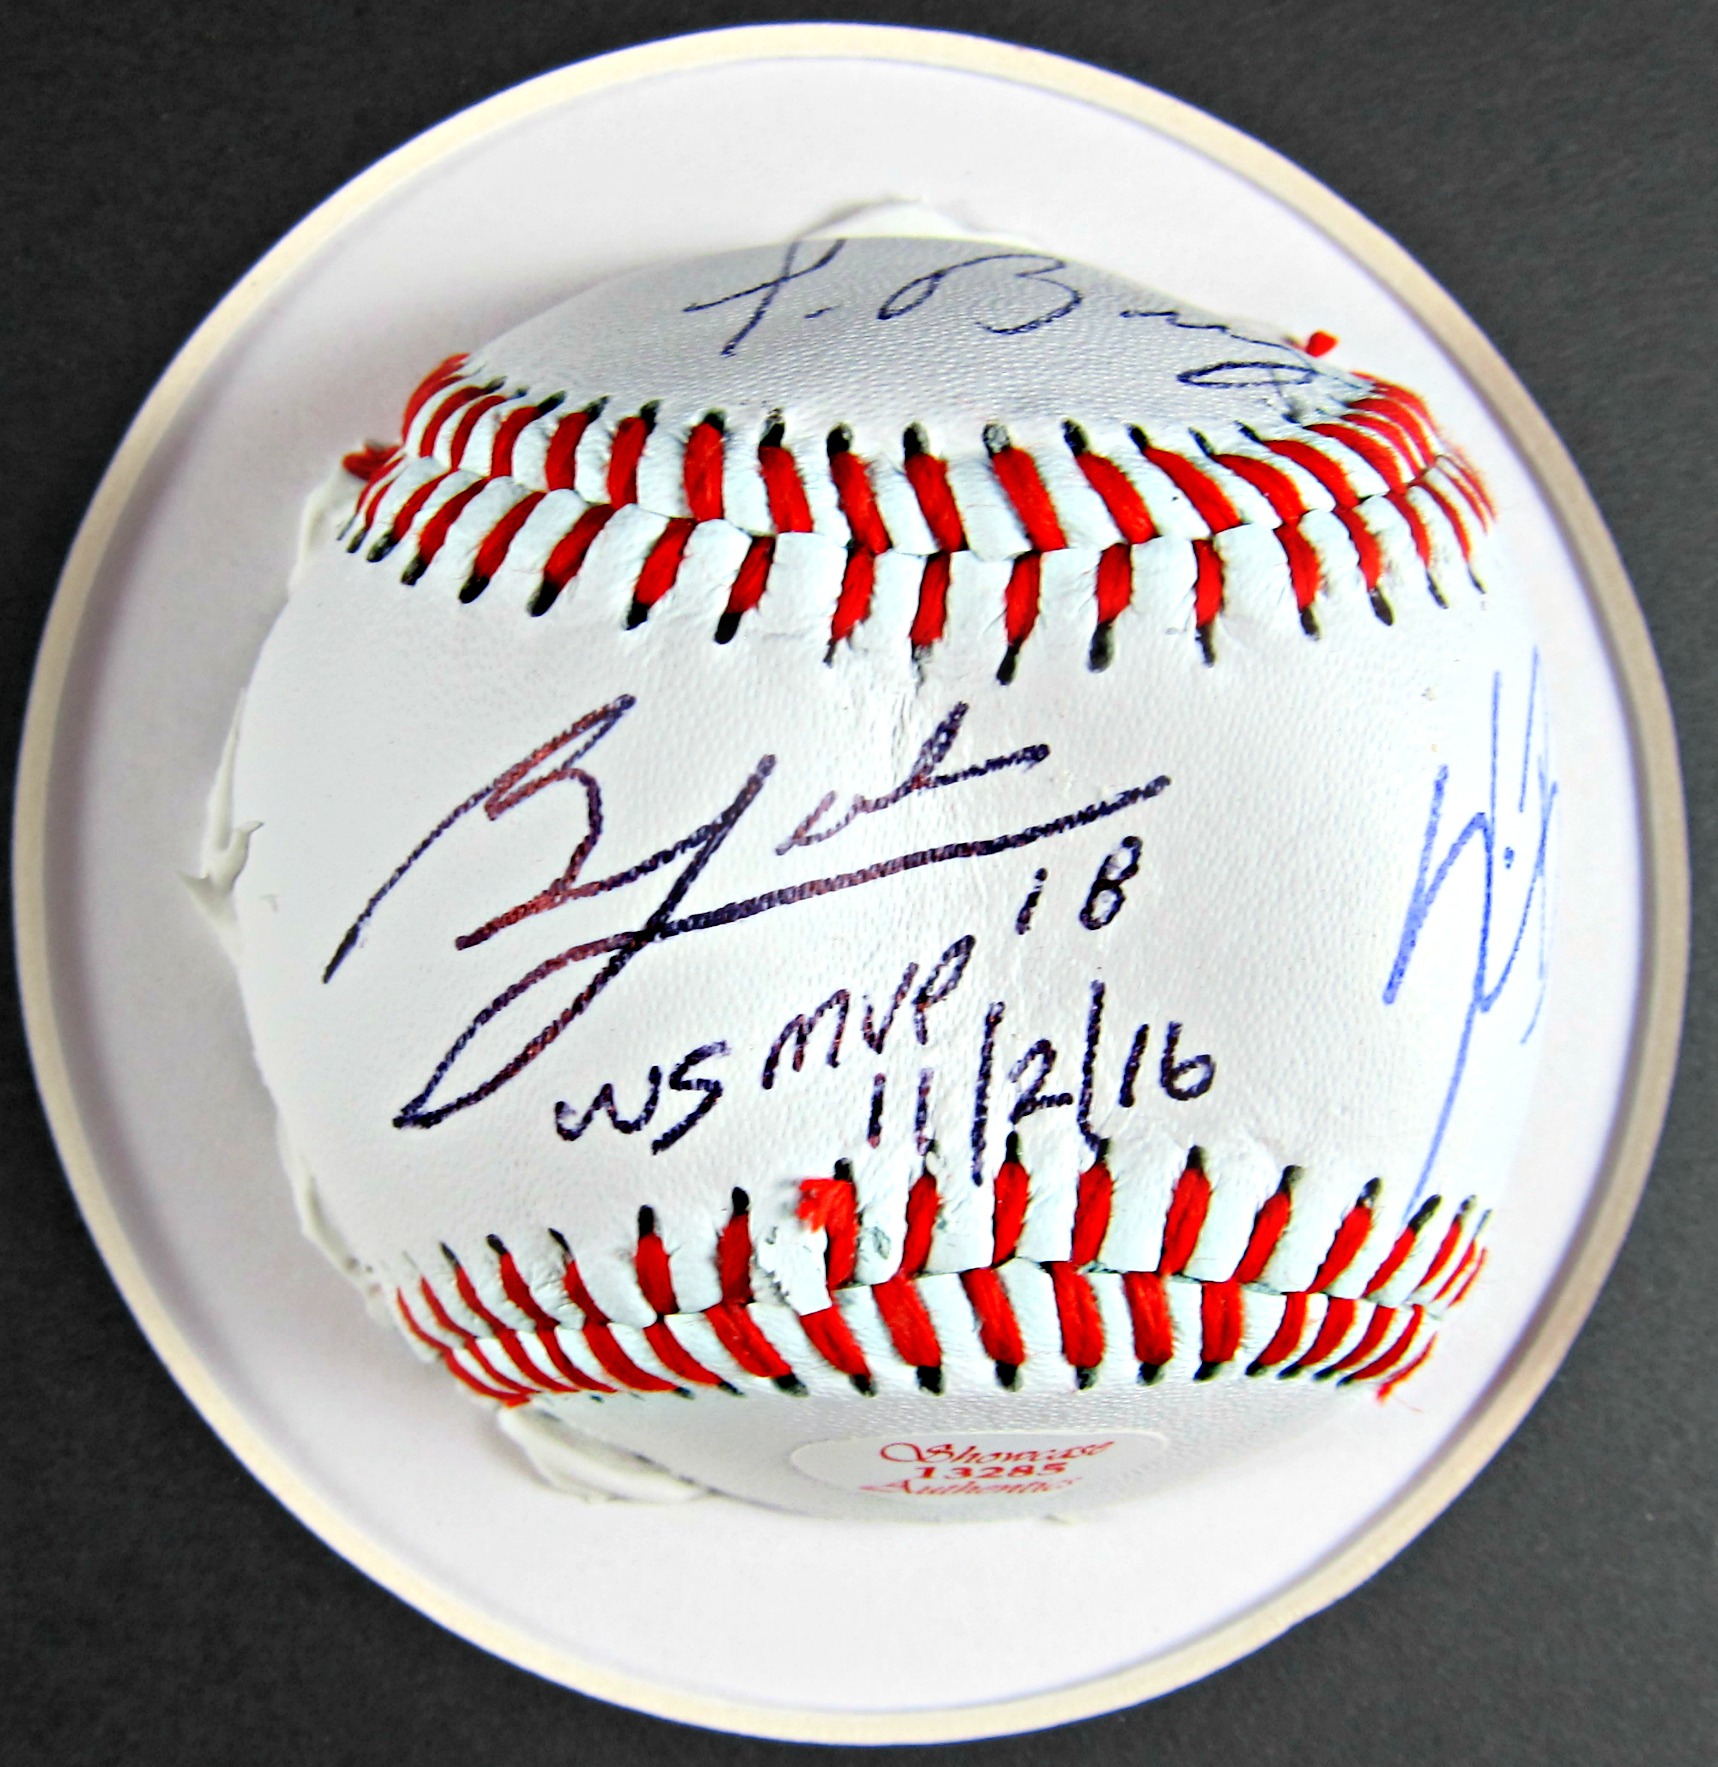 Chicago Cubs World Series Autographed Ball Display - Memorabilia Center